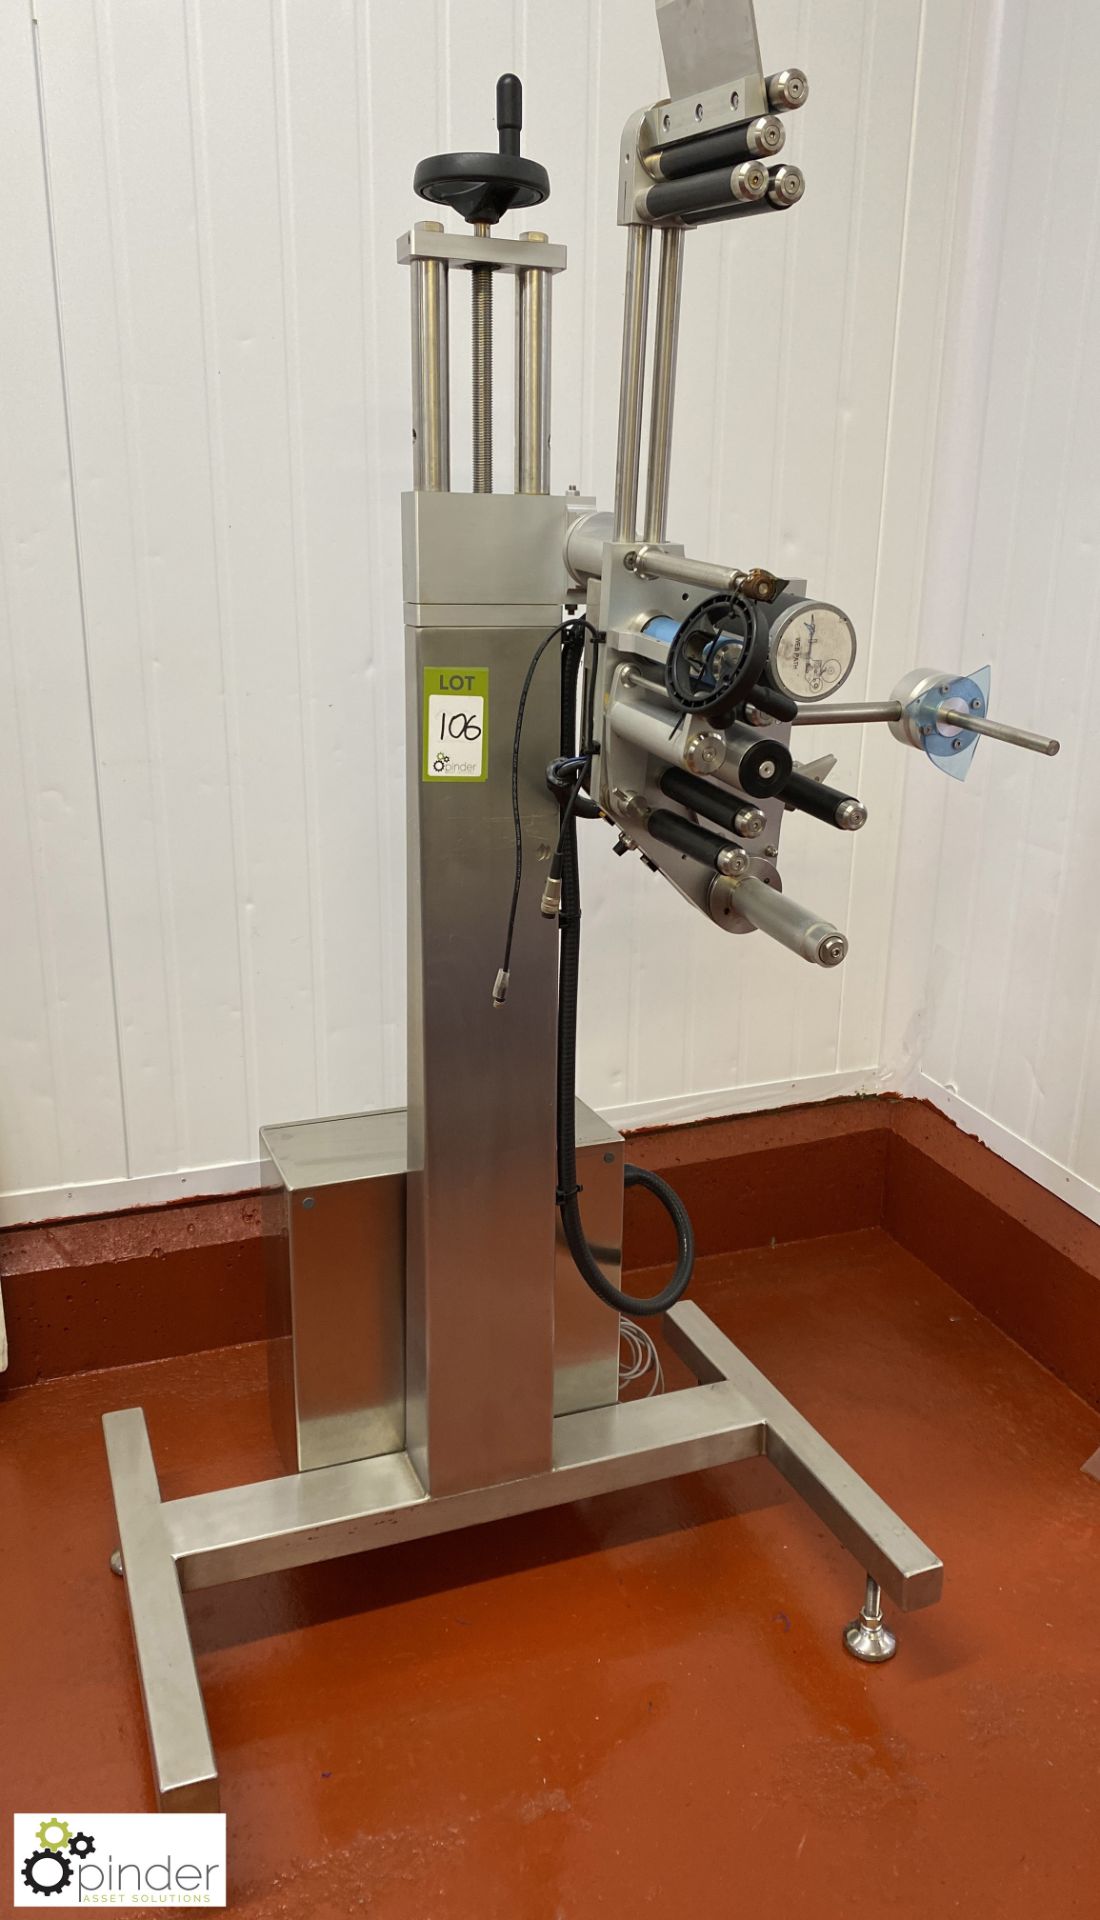 PLF H-P100 stainless steel mounted Labeller, 230volts (Lift Out Fee: £30 plus VAT)